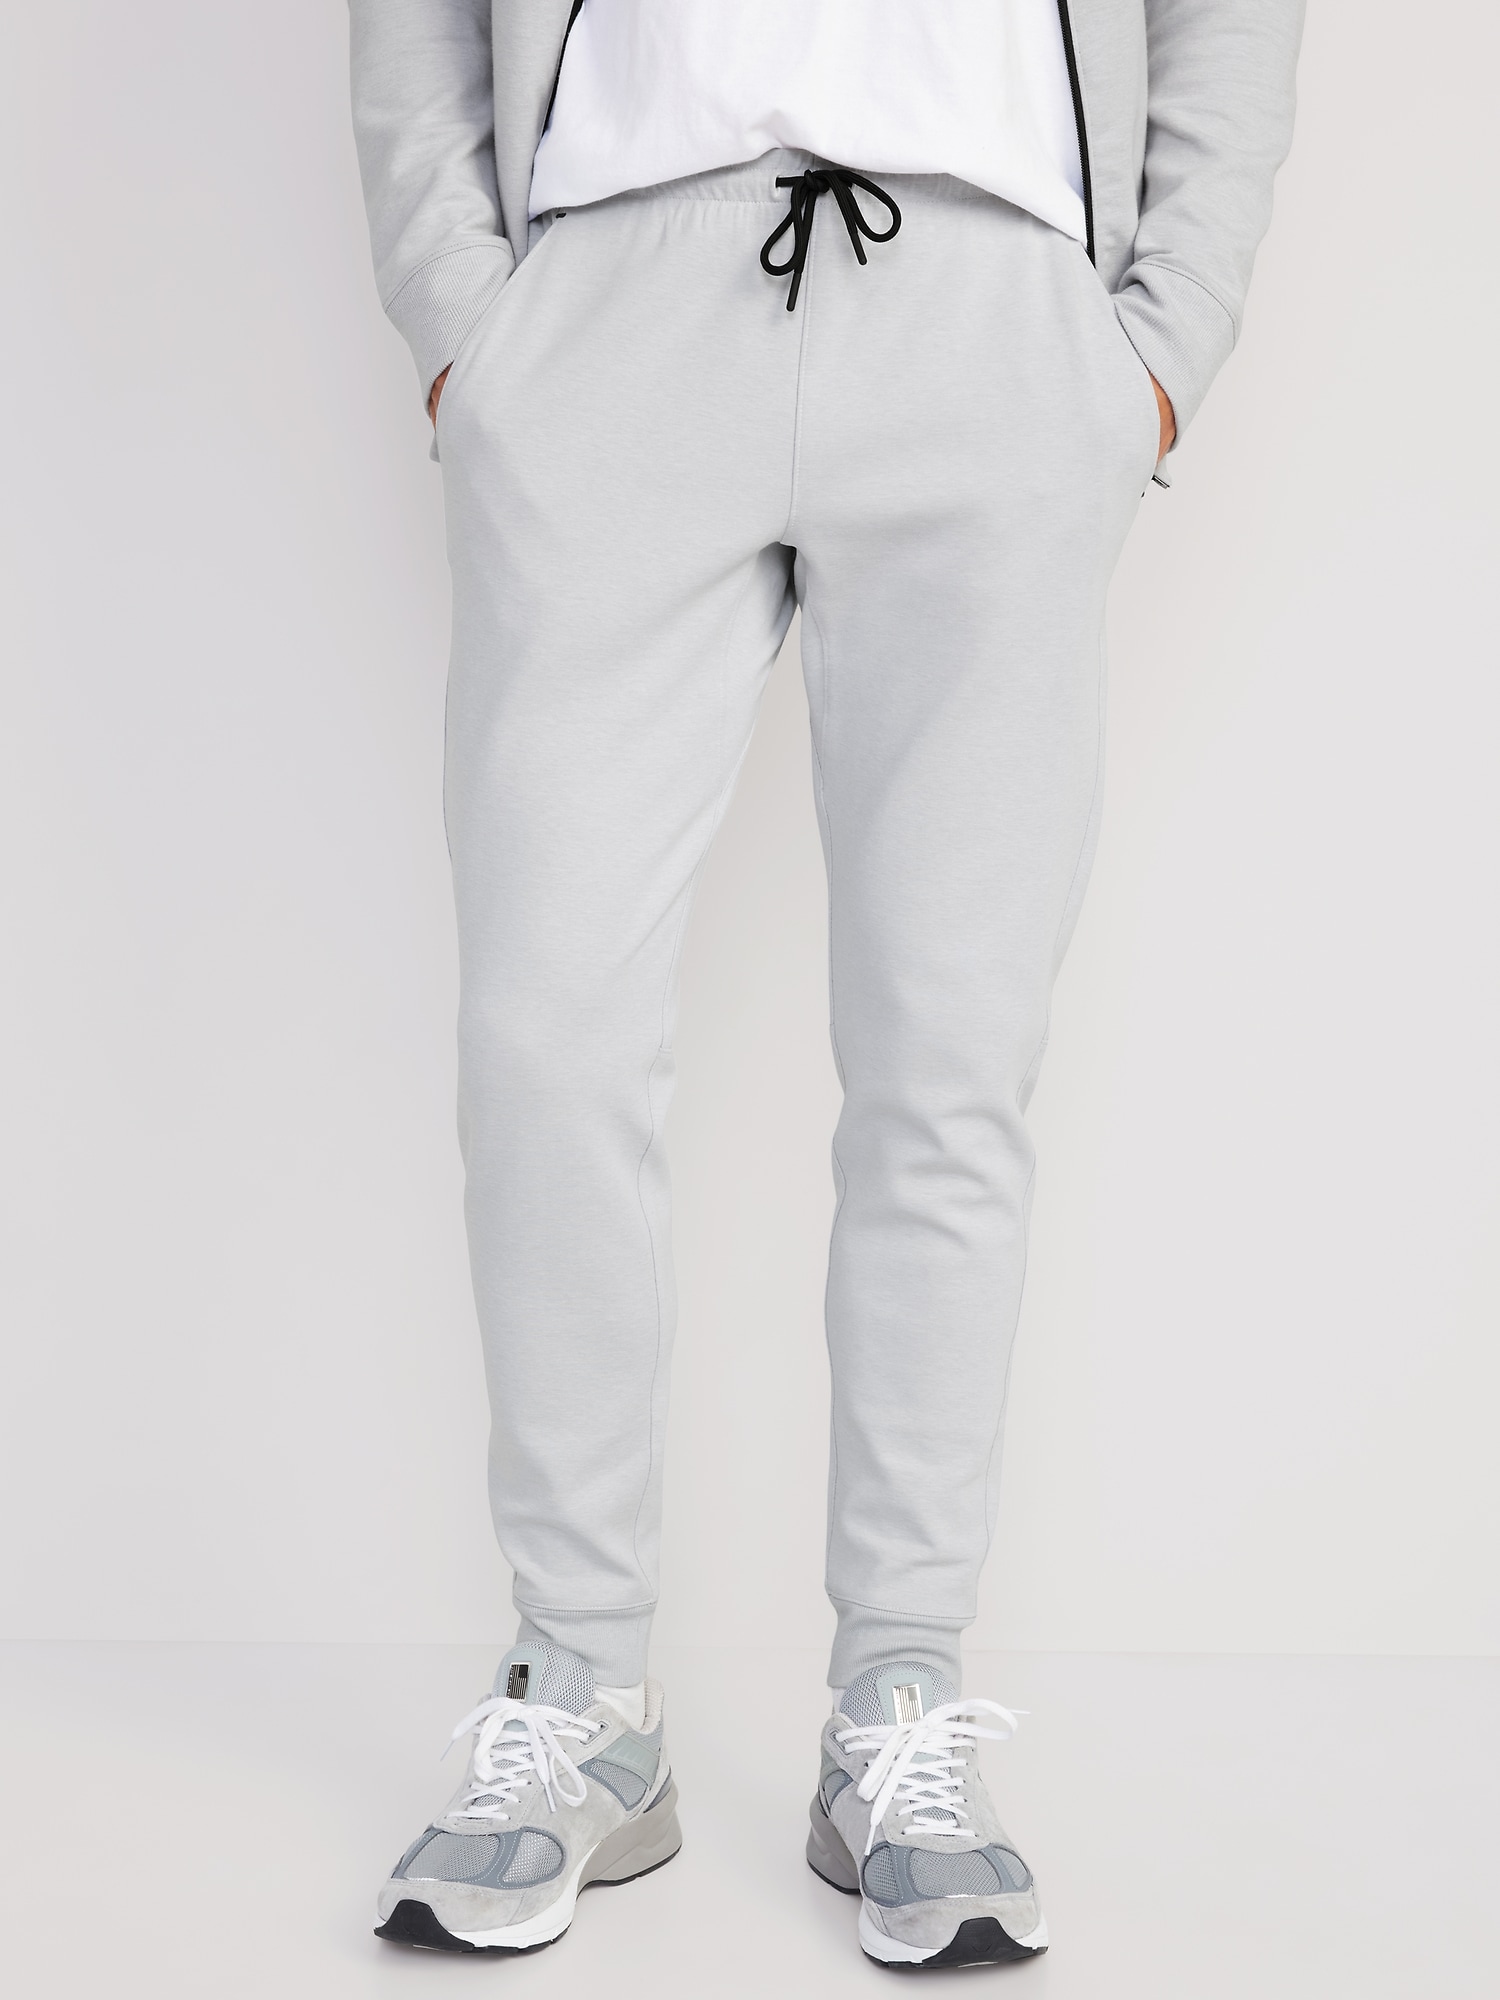 Old Navy Dynamic Fleece Tapered-Fit Sweatpants for Men